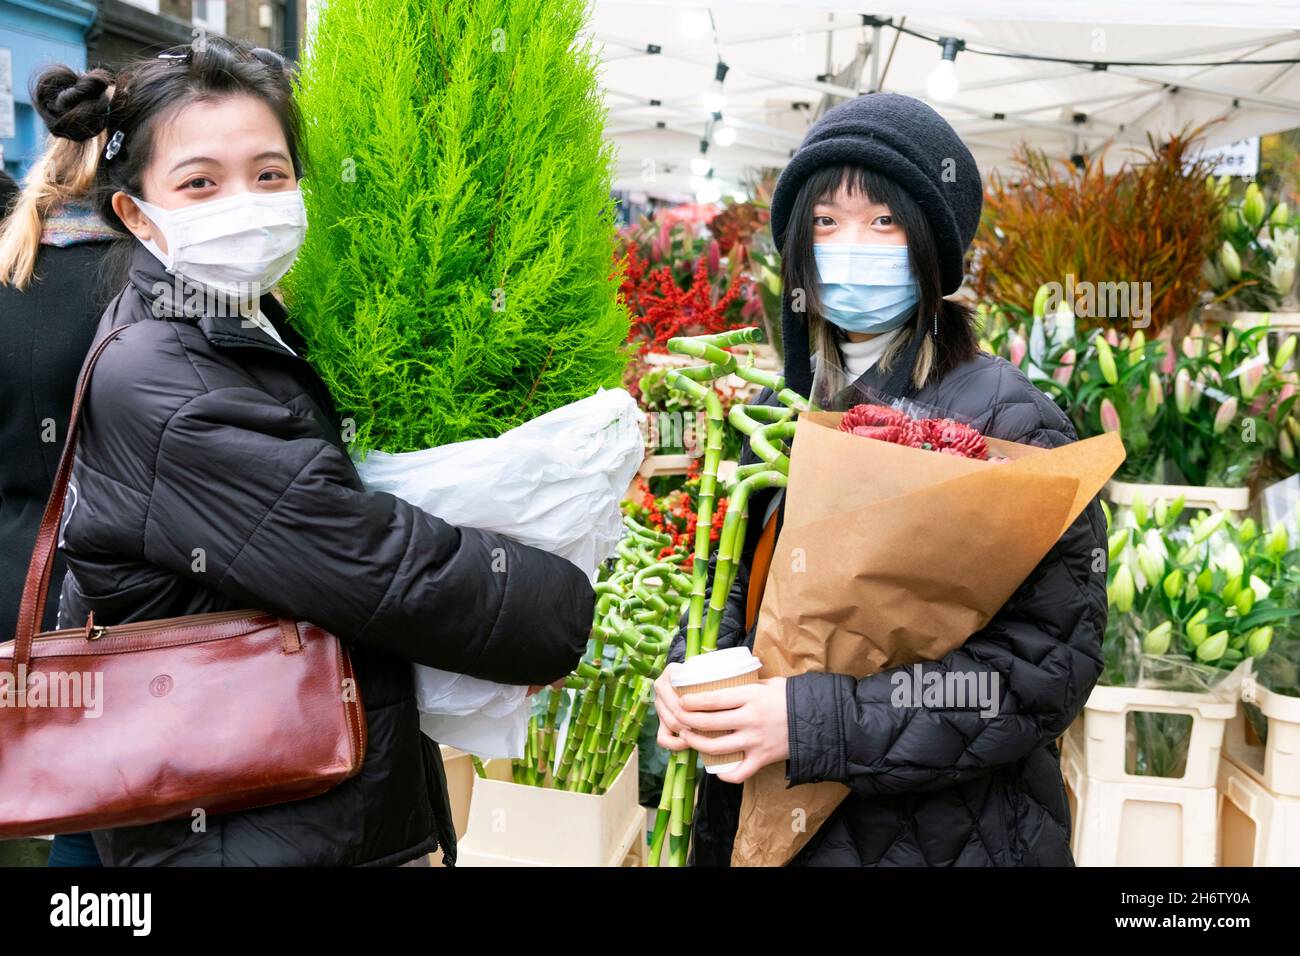 Columbia Road Flower Market young Asian women plants facemasks in street at market stalls on Sunday in November 2021 East London UK KATHY DEWITT Stock Photo